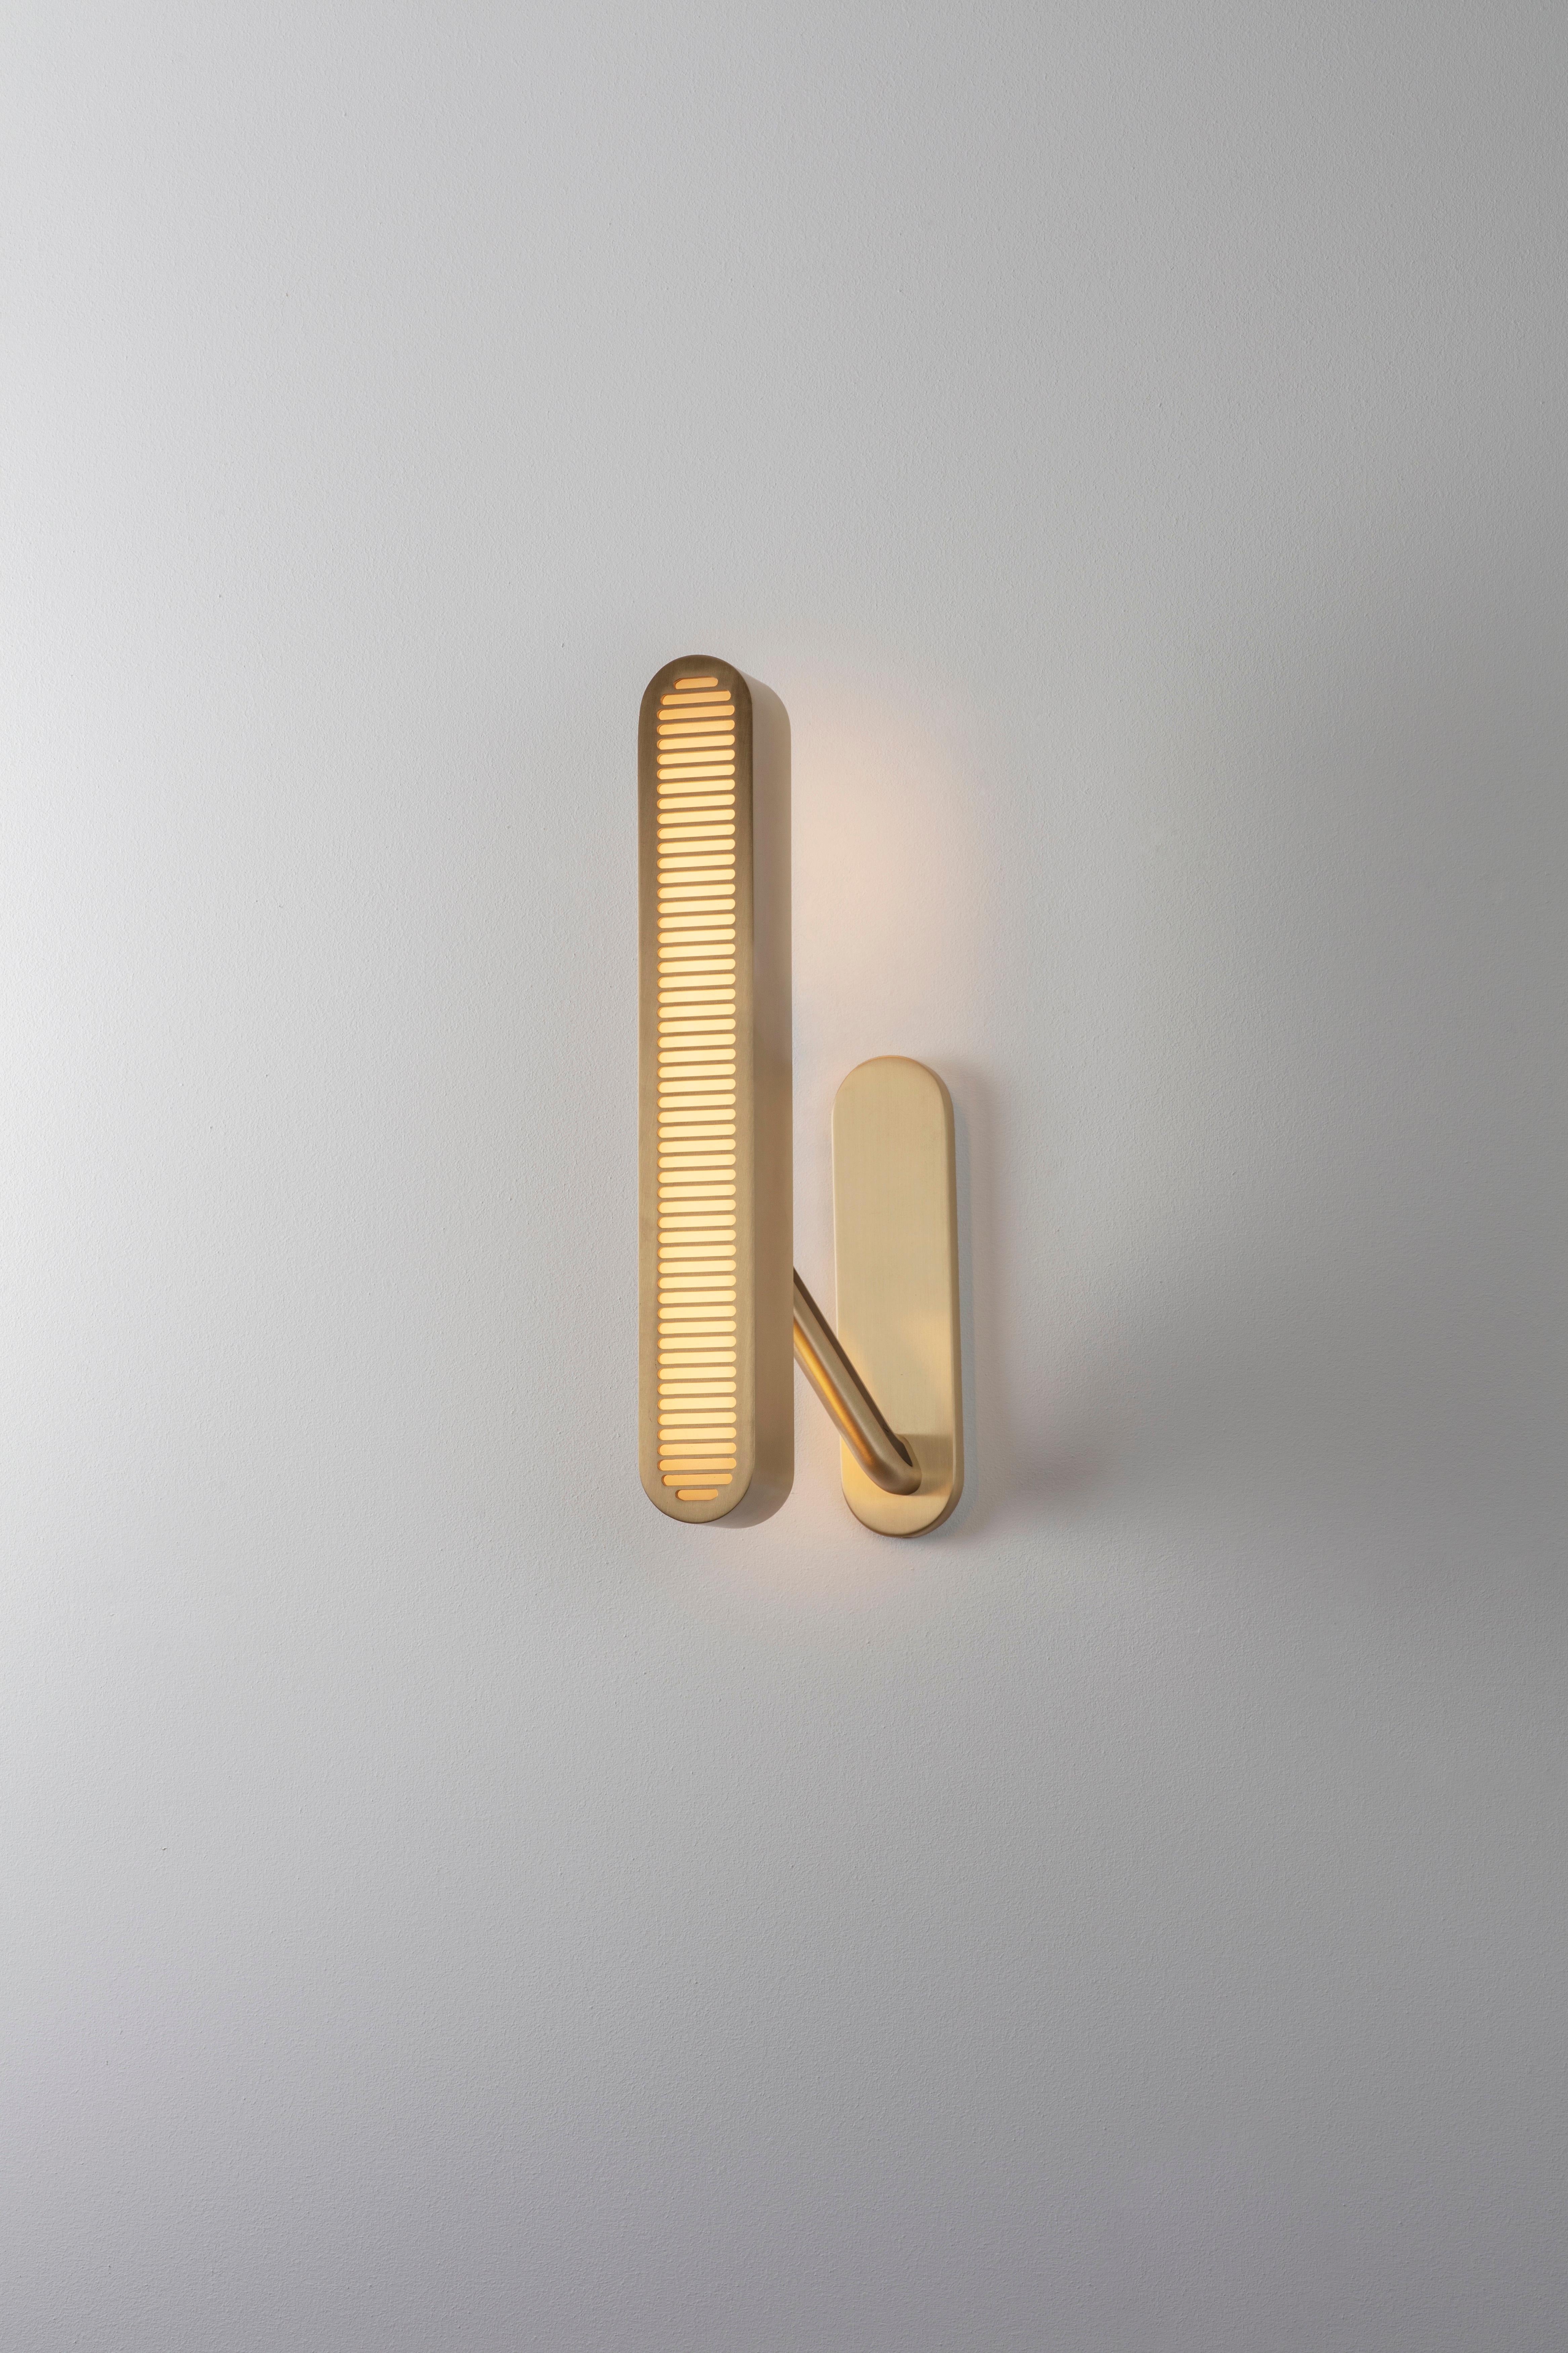 Colt wall light single by Bert Frank
Dimensions: 17 x 10 x 40 cm
Materials: Brass 

Brushed brass lacquered as standard custom finishes, left/right options available
All our lamps can be wired according to each country. If sold to the USA it will be